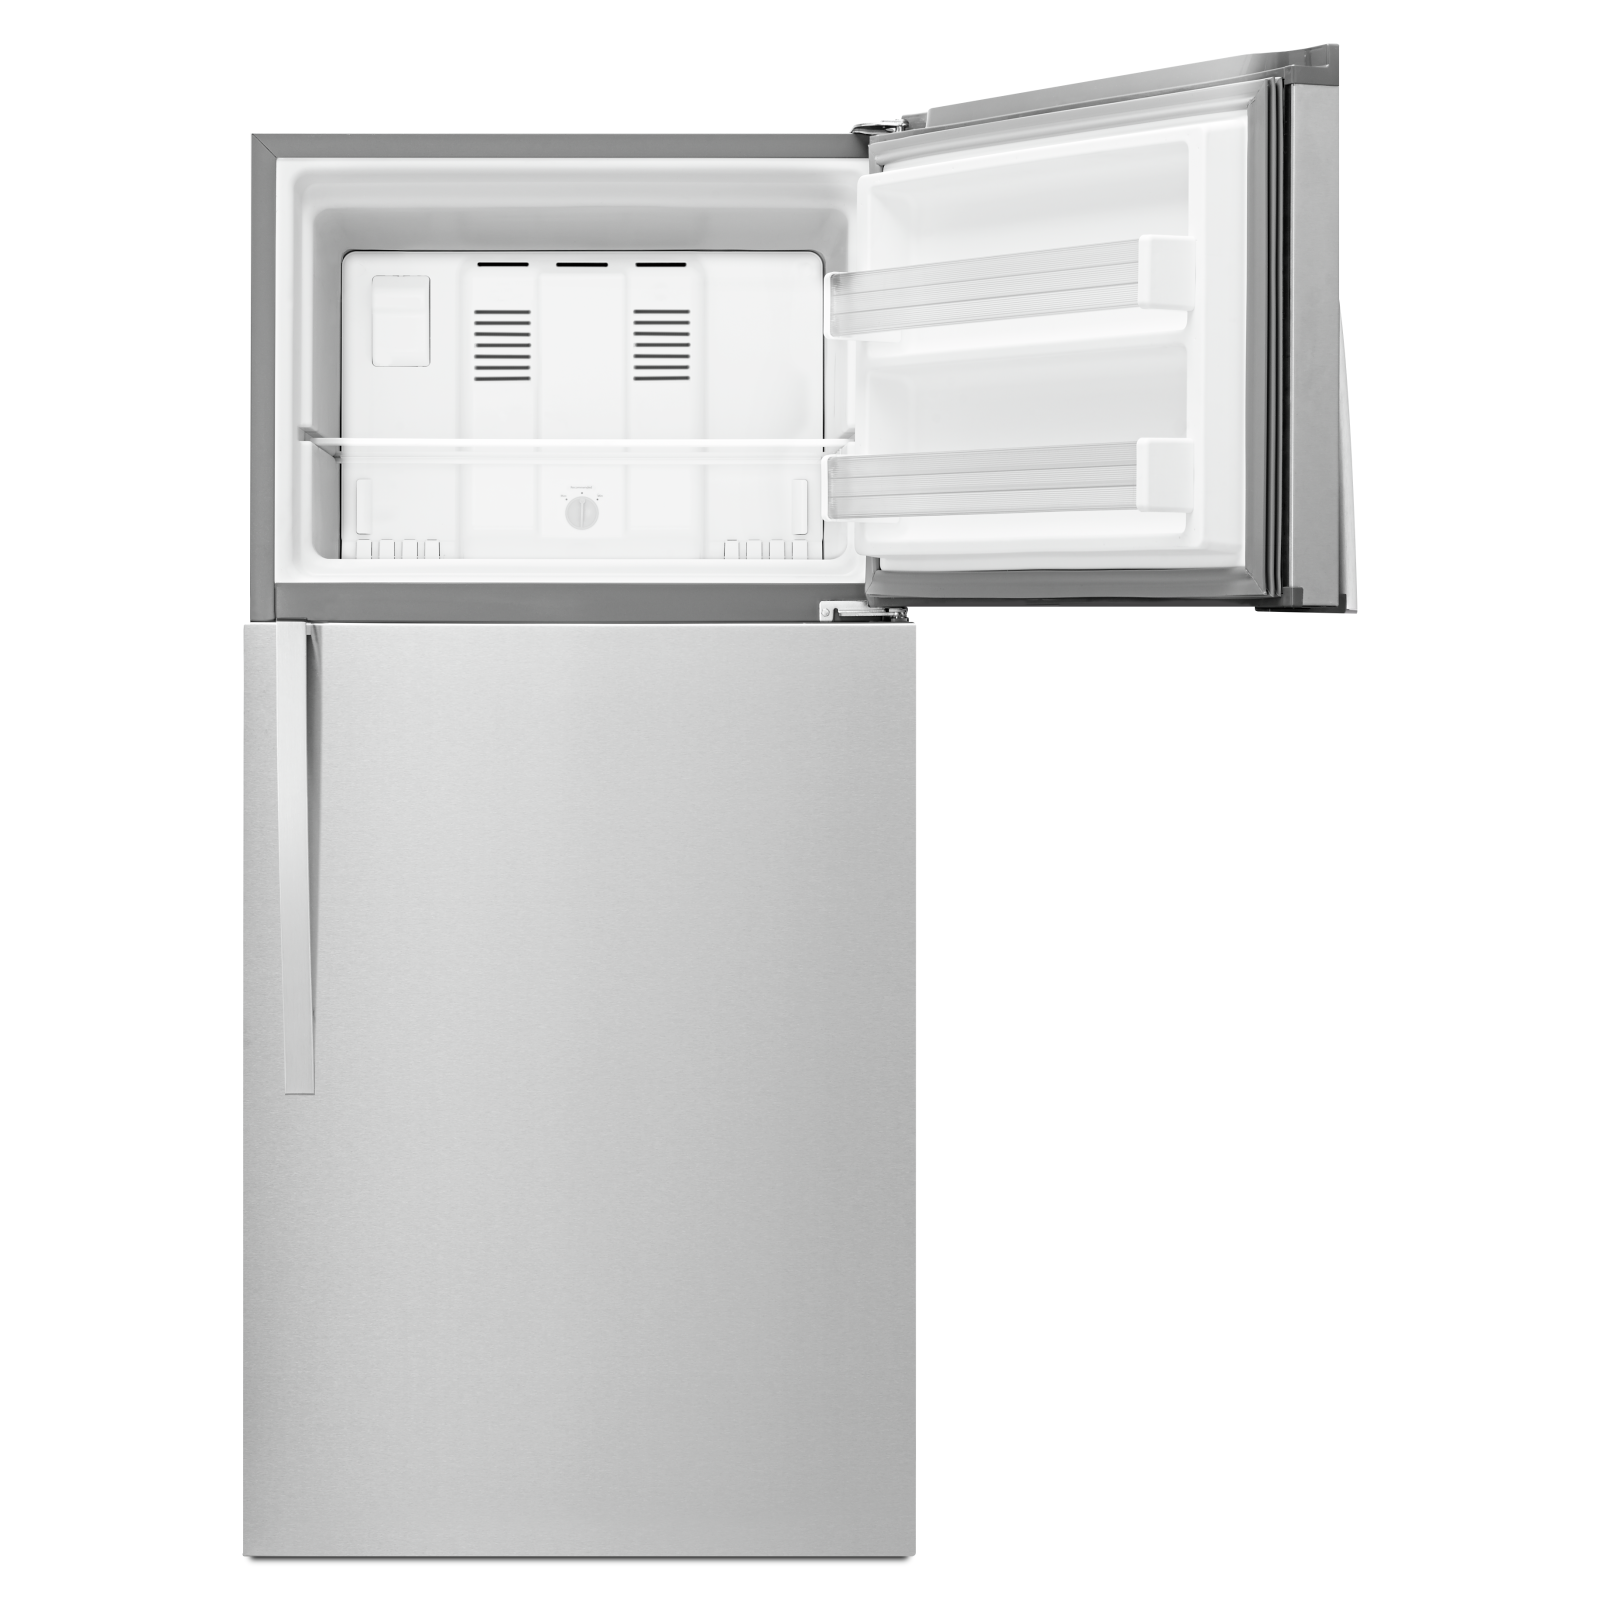 Whirlpool - 29.775 Inch 19.23 cu. ft Top Mount Refrigerator in Stainless - WRT519SZDM